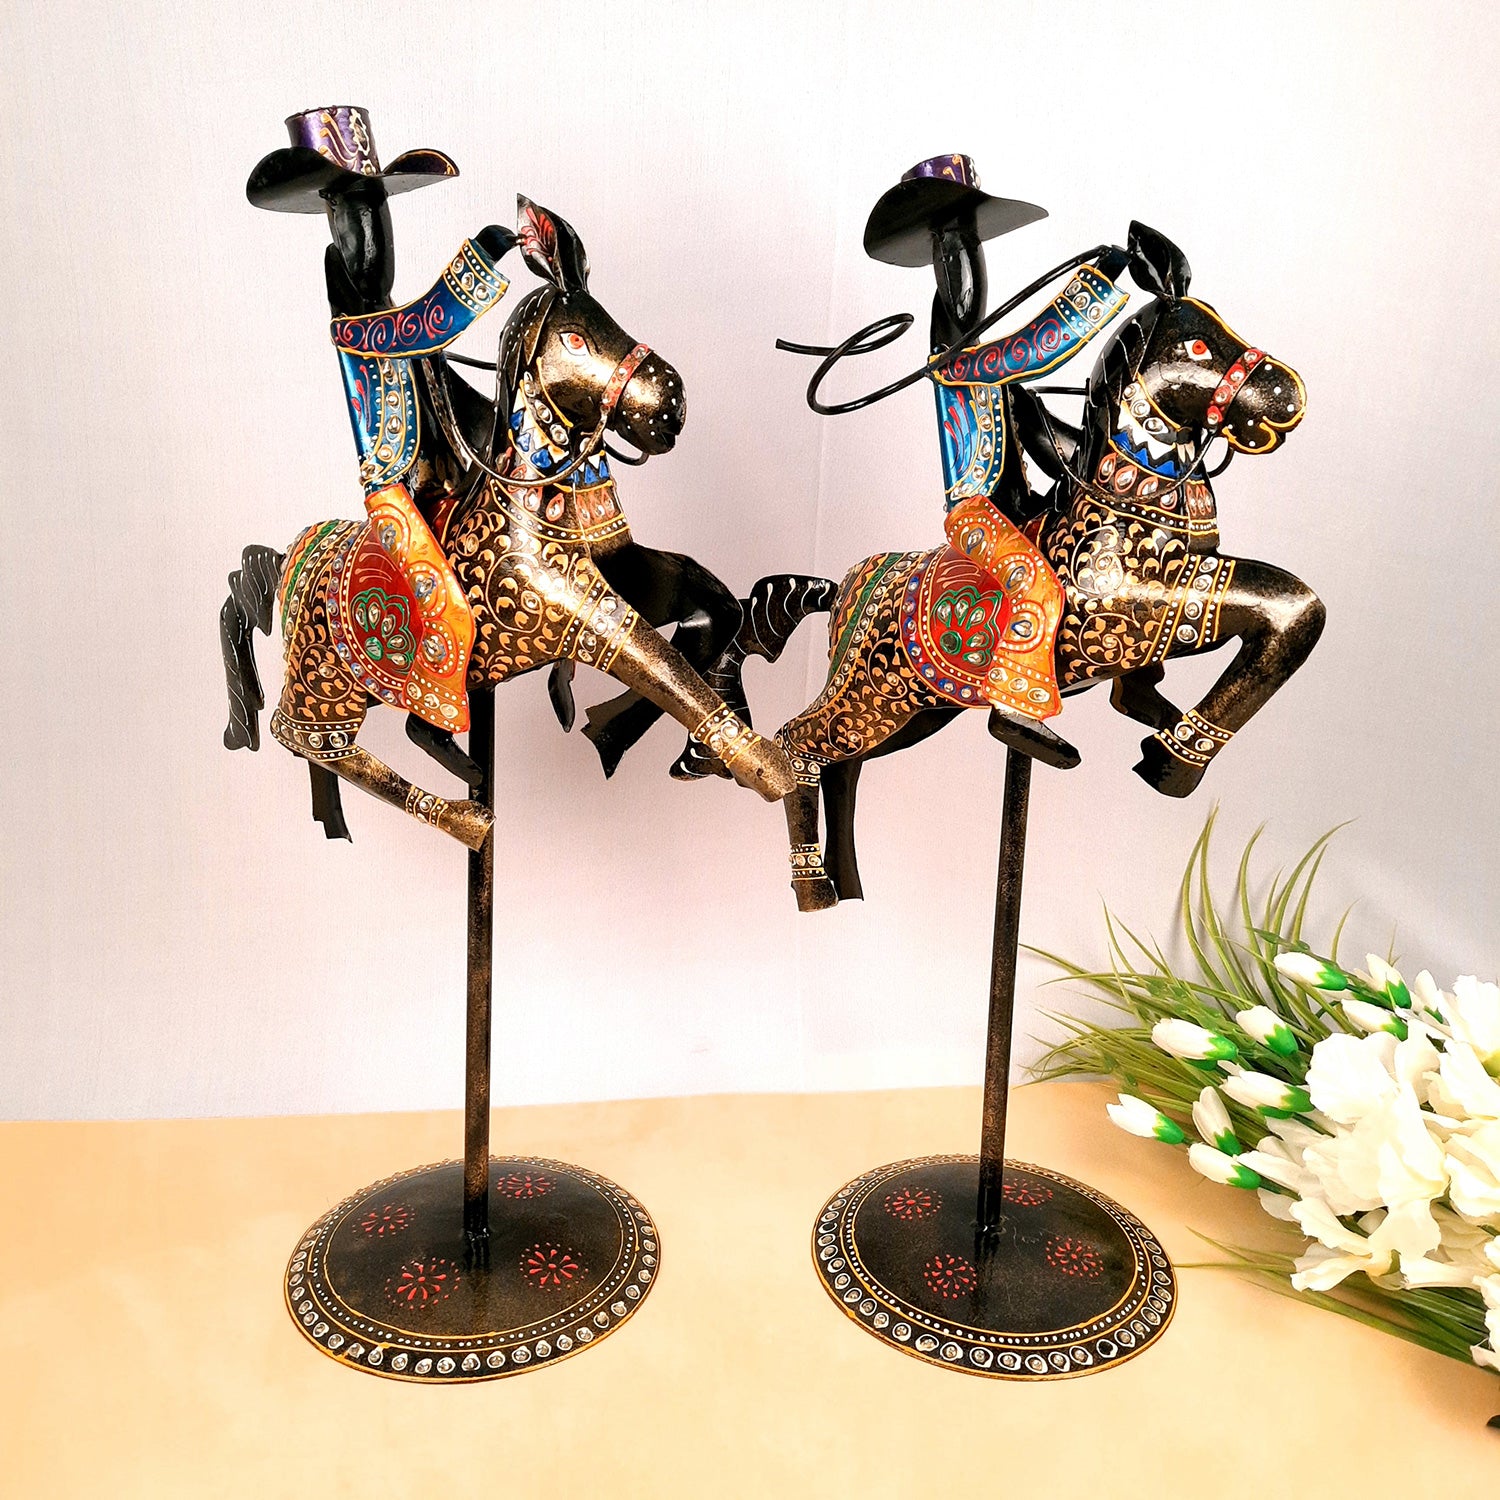 Showpiece - Cowboy Riding On Horse With Hunter Figurine | Decorative Big Show piece - for Home, Corner, Living Room, Office Desk & Table Decor | Gifts For Him - 16 Inch (Set of 2) - Apkamart